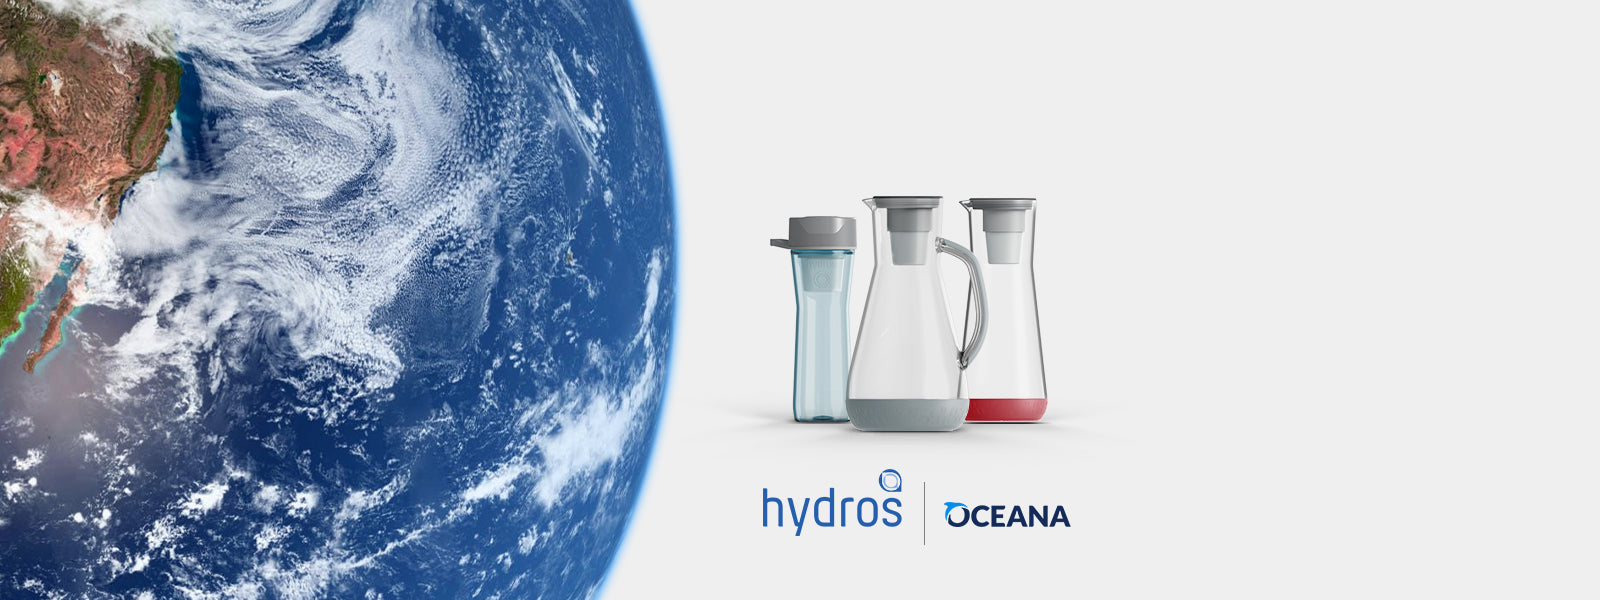 Hydros Partners with Oceana to Help Protect and Restore Oceans